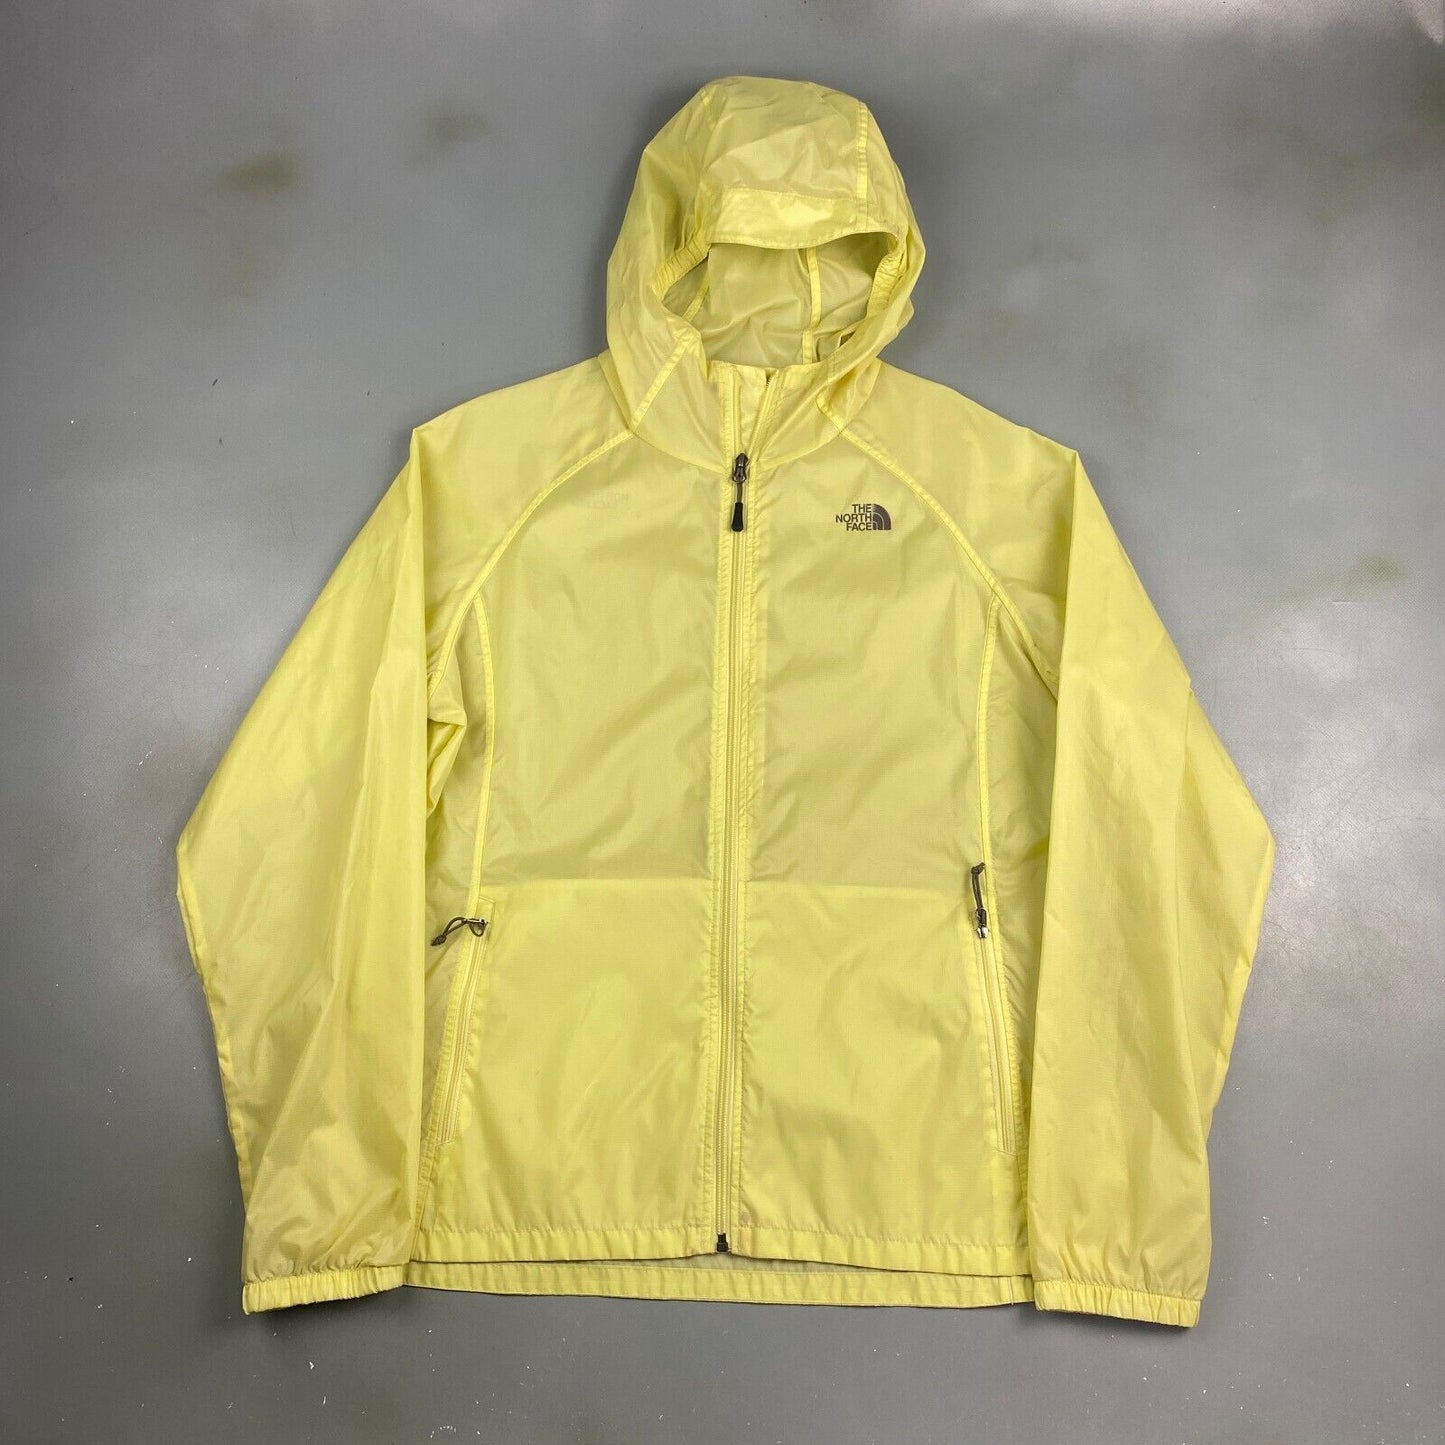 VINTAGE The North Face Thin Yellow Shell Windbreaker Jacket sz XL Adult